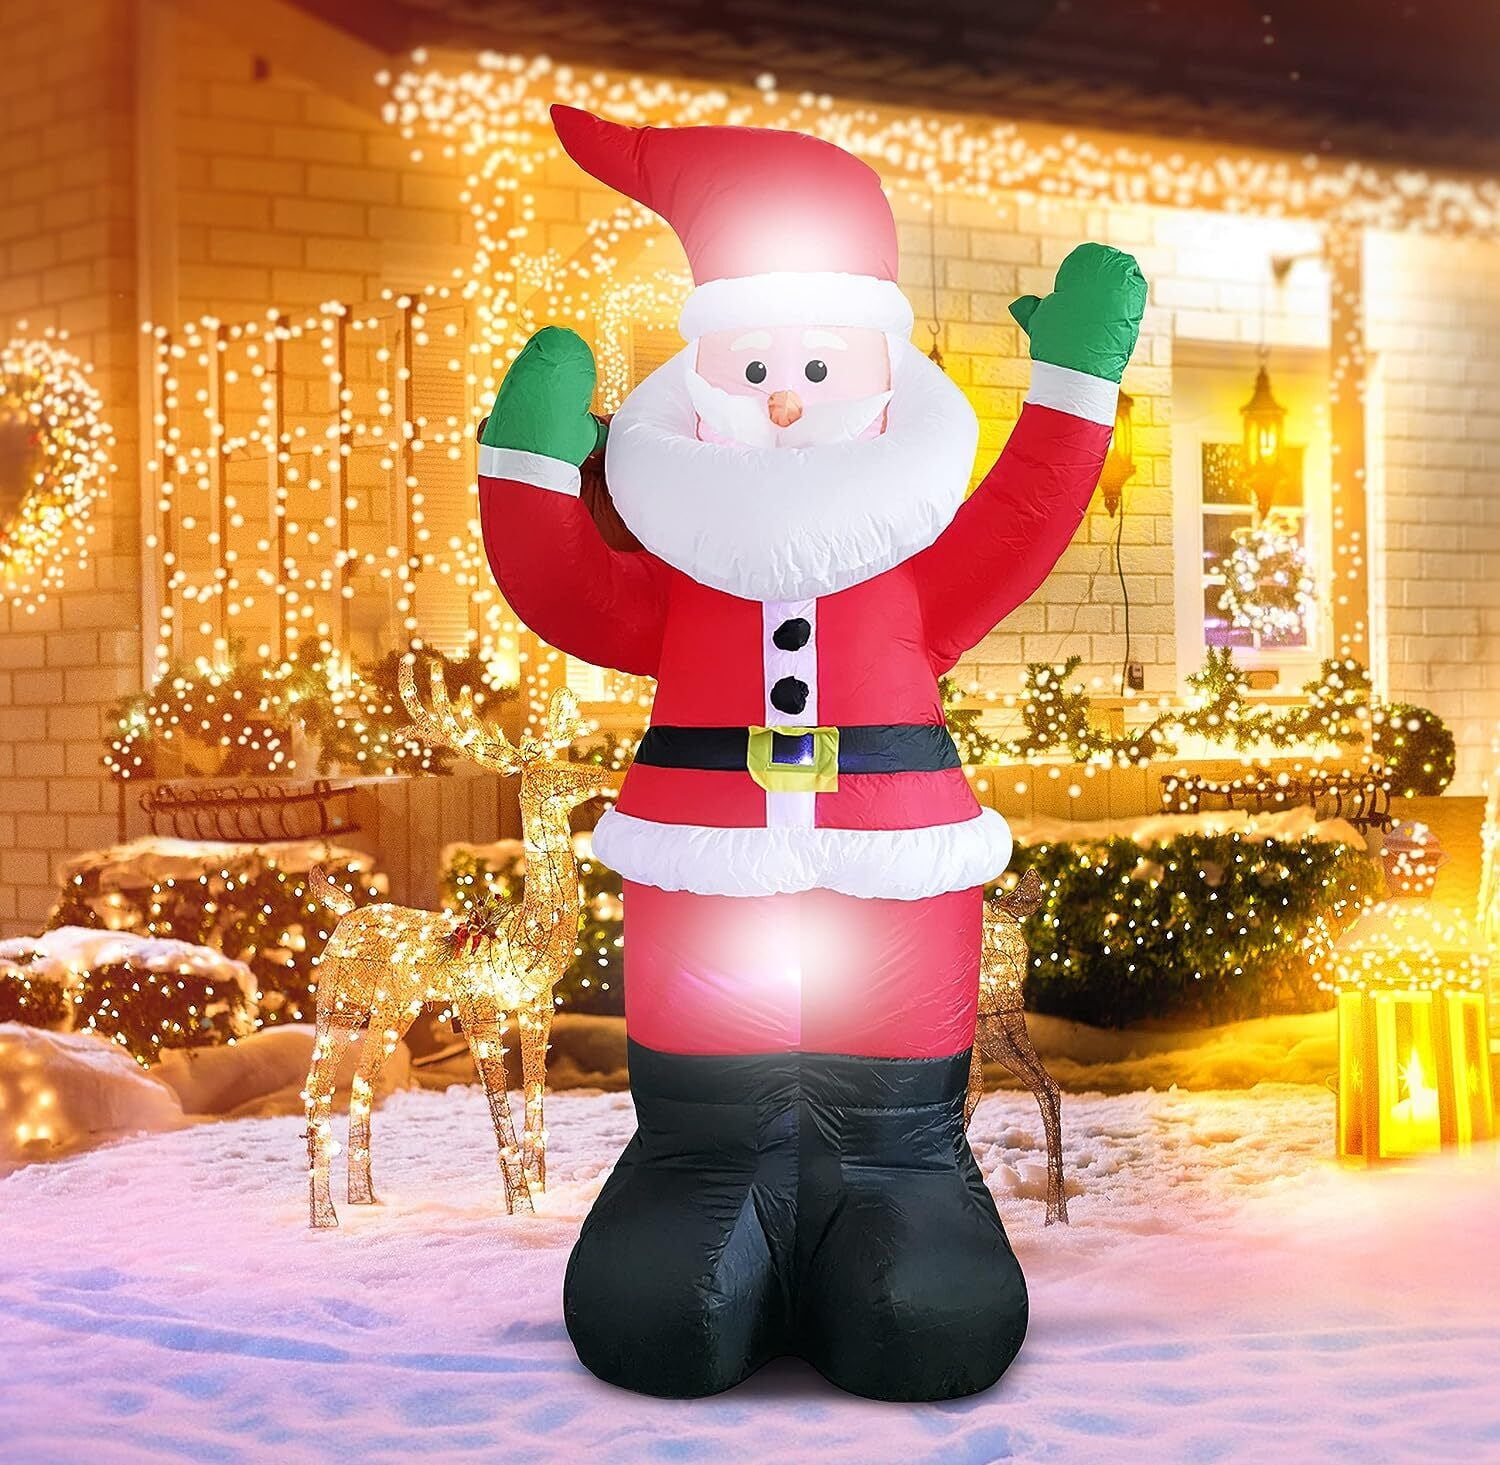 6 Feet Christmas Inflatables Lighted Santa Claus Blow Up Indoor Outdoor ...